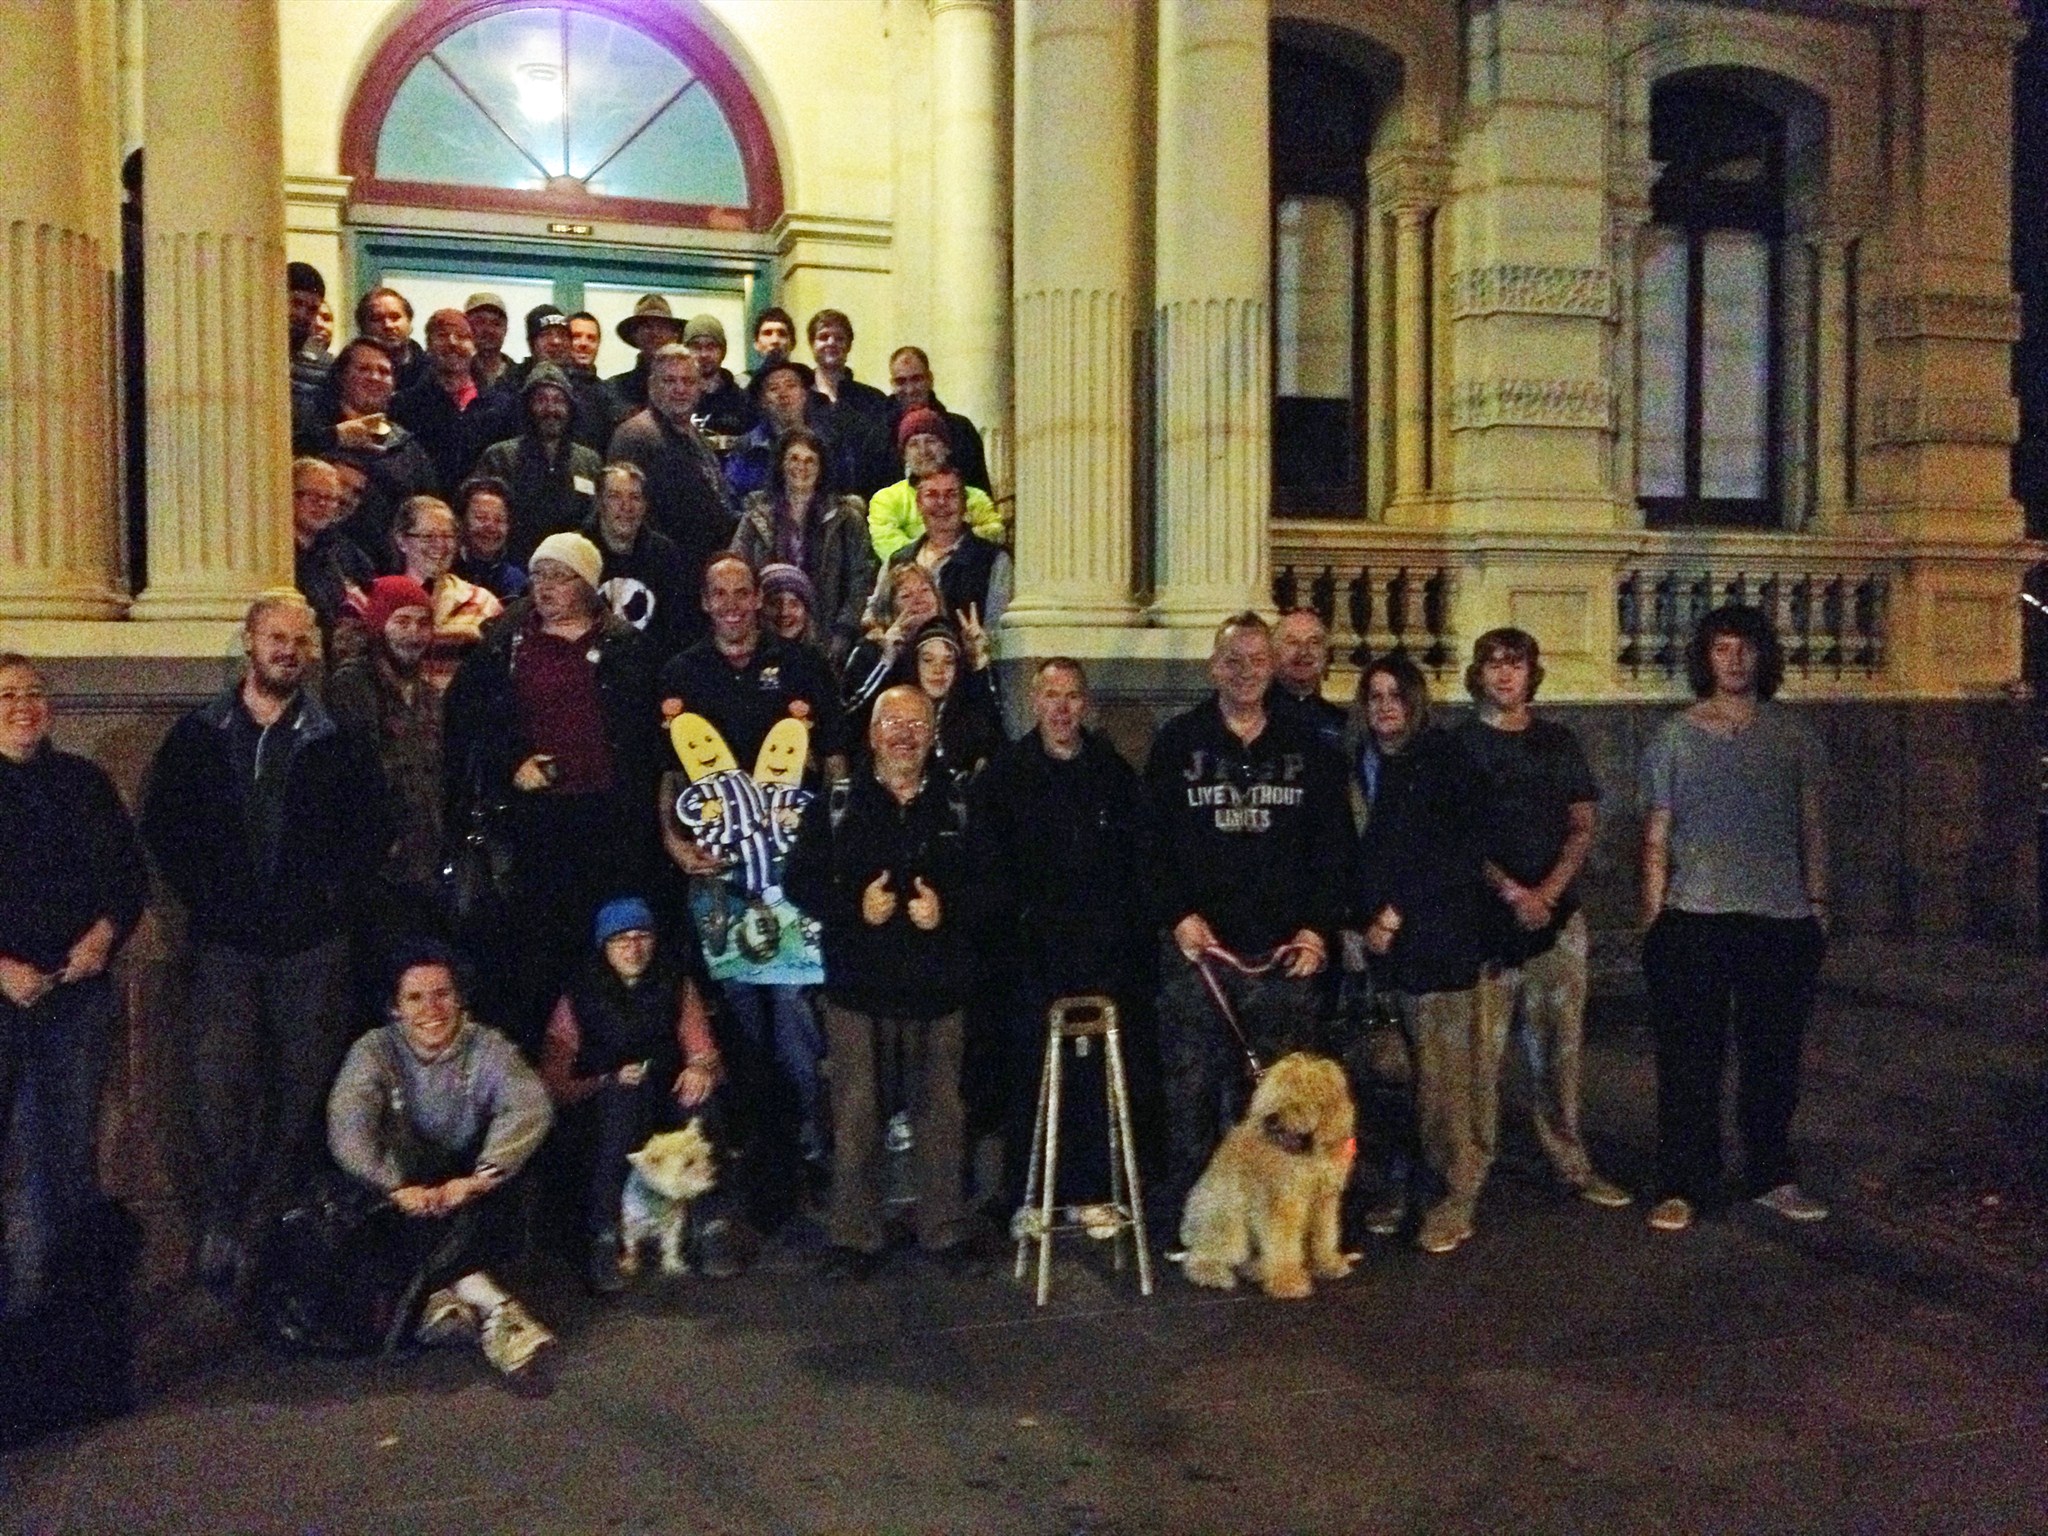 WWFM X - What time ? 3am at Northcote town hall